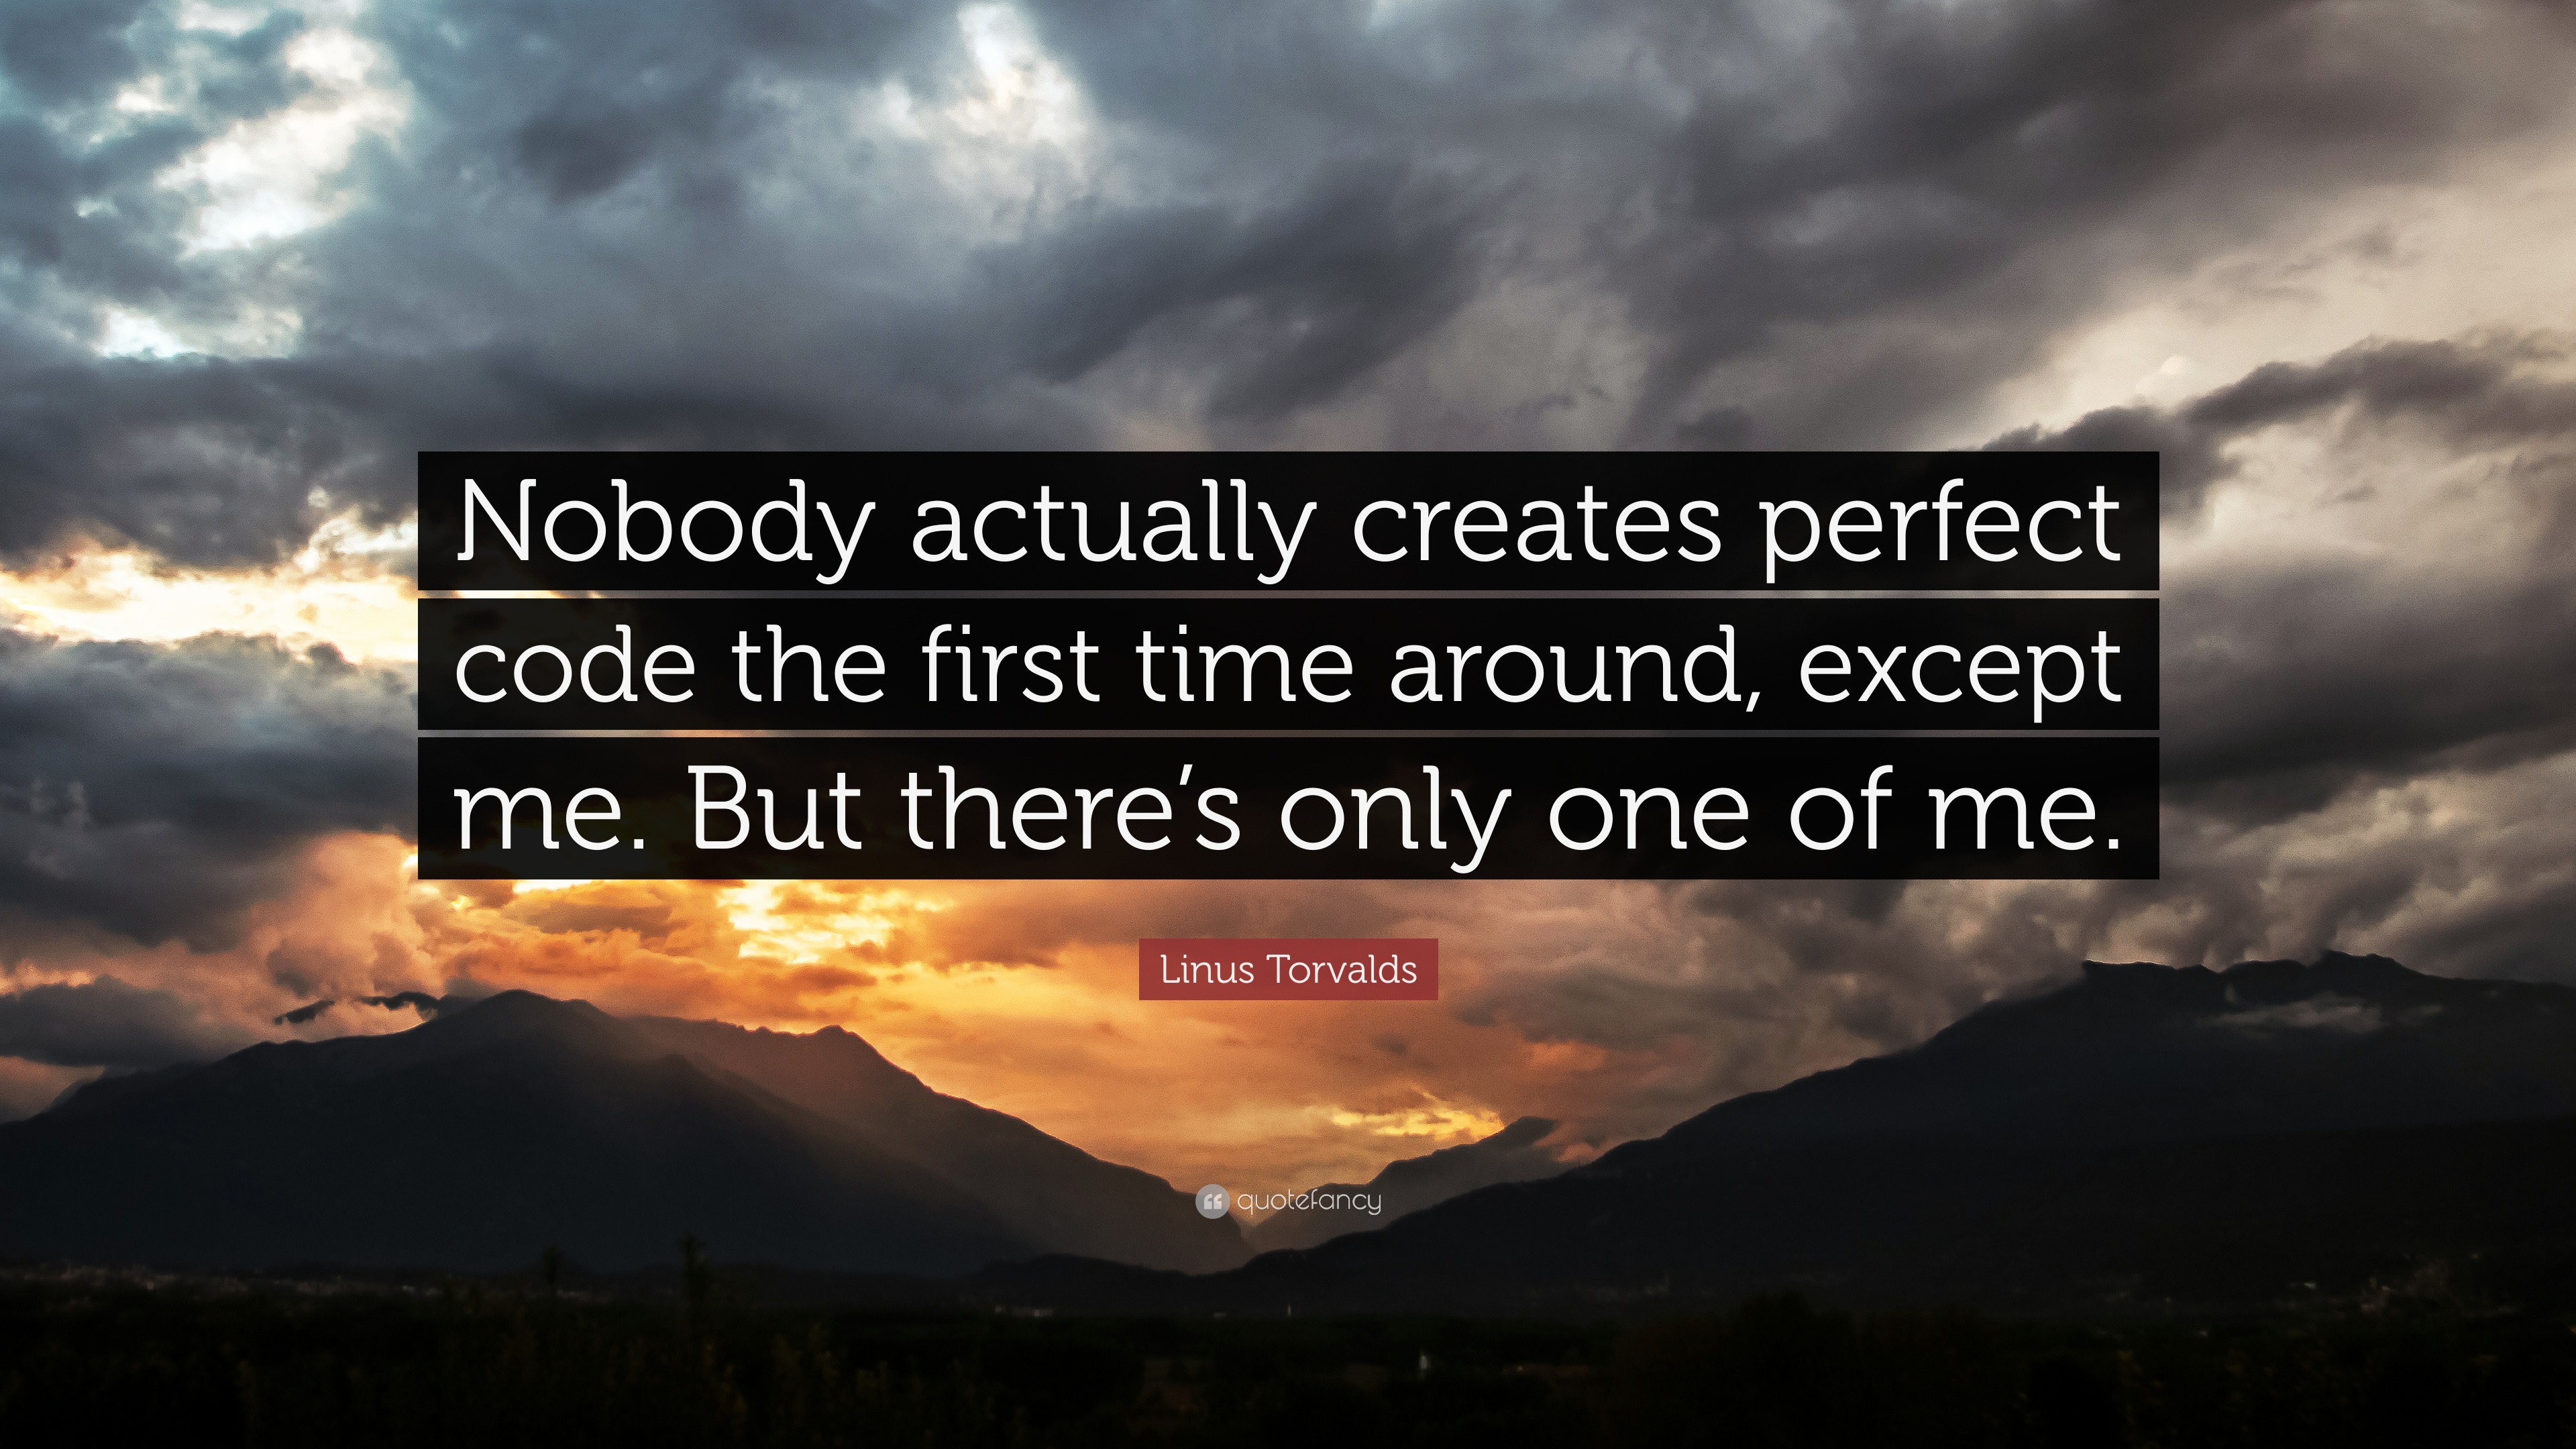 Linus Torvalds Quote: “Nobody actually creates perfect code the first ...